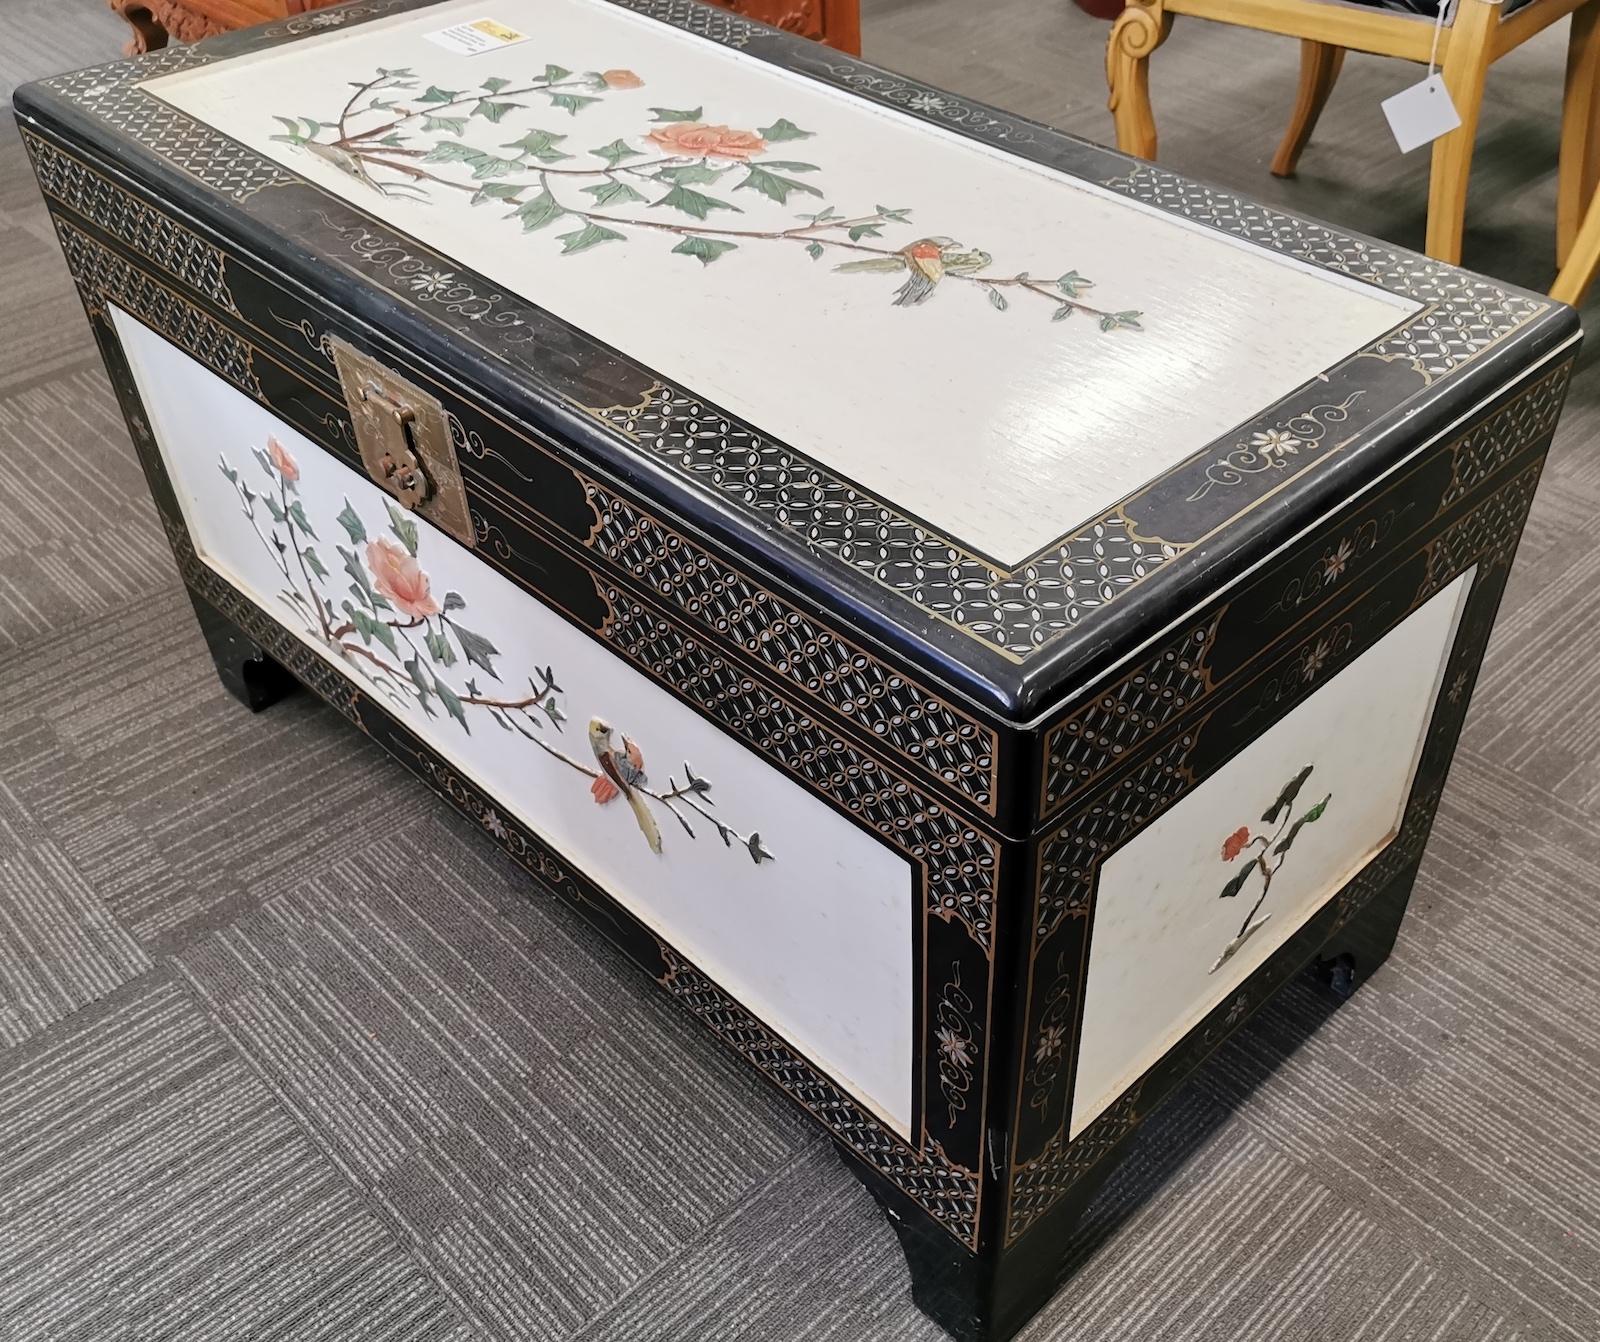 Chinese white lacquer camphorwood chest, with hardstone decoration,
Measures: 100 x 50 x 58cm high.
Our eclectic stock crosses cultures, continents, styles and famous names.